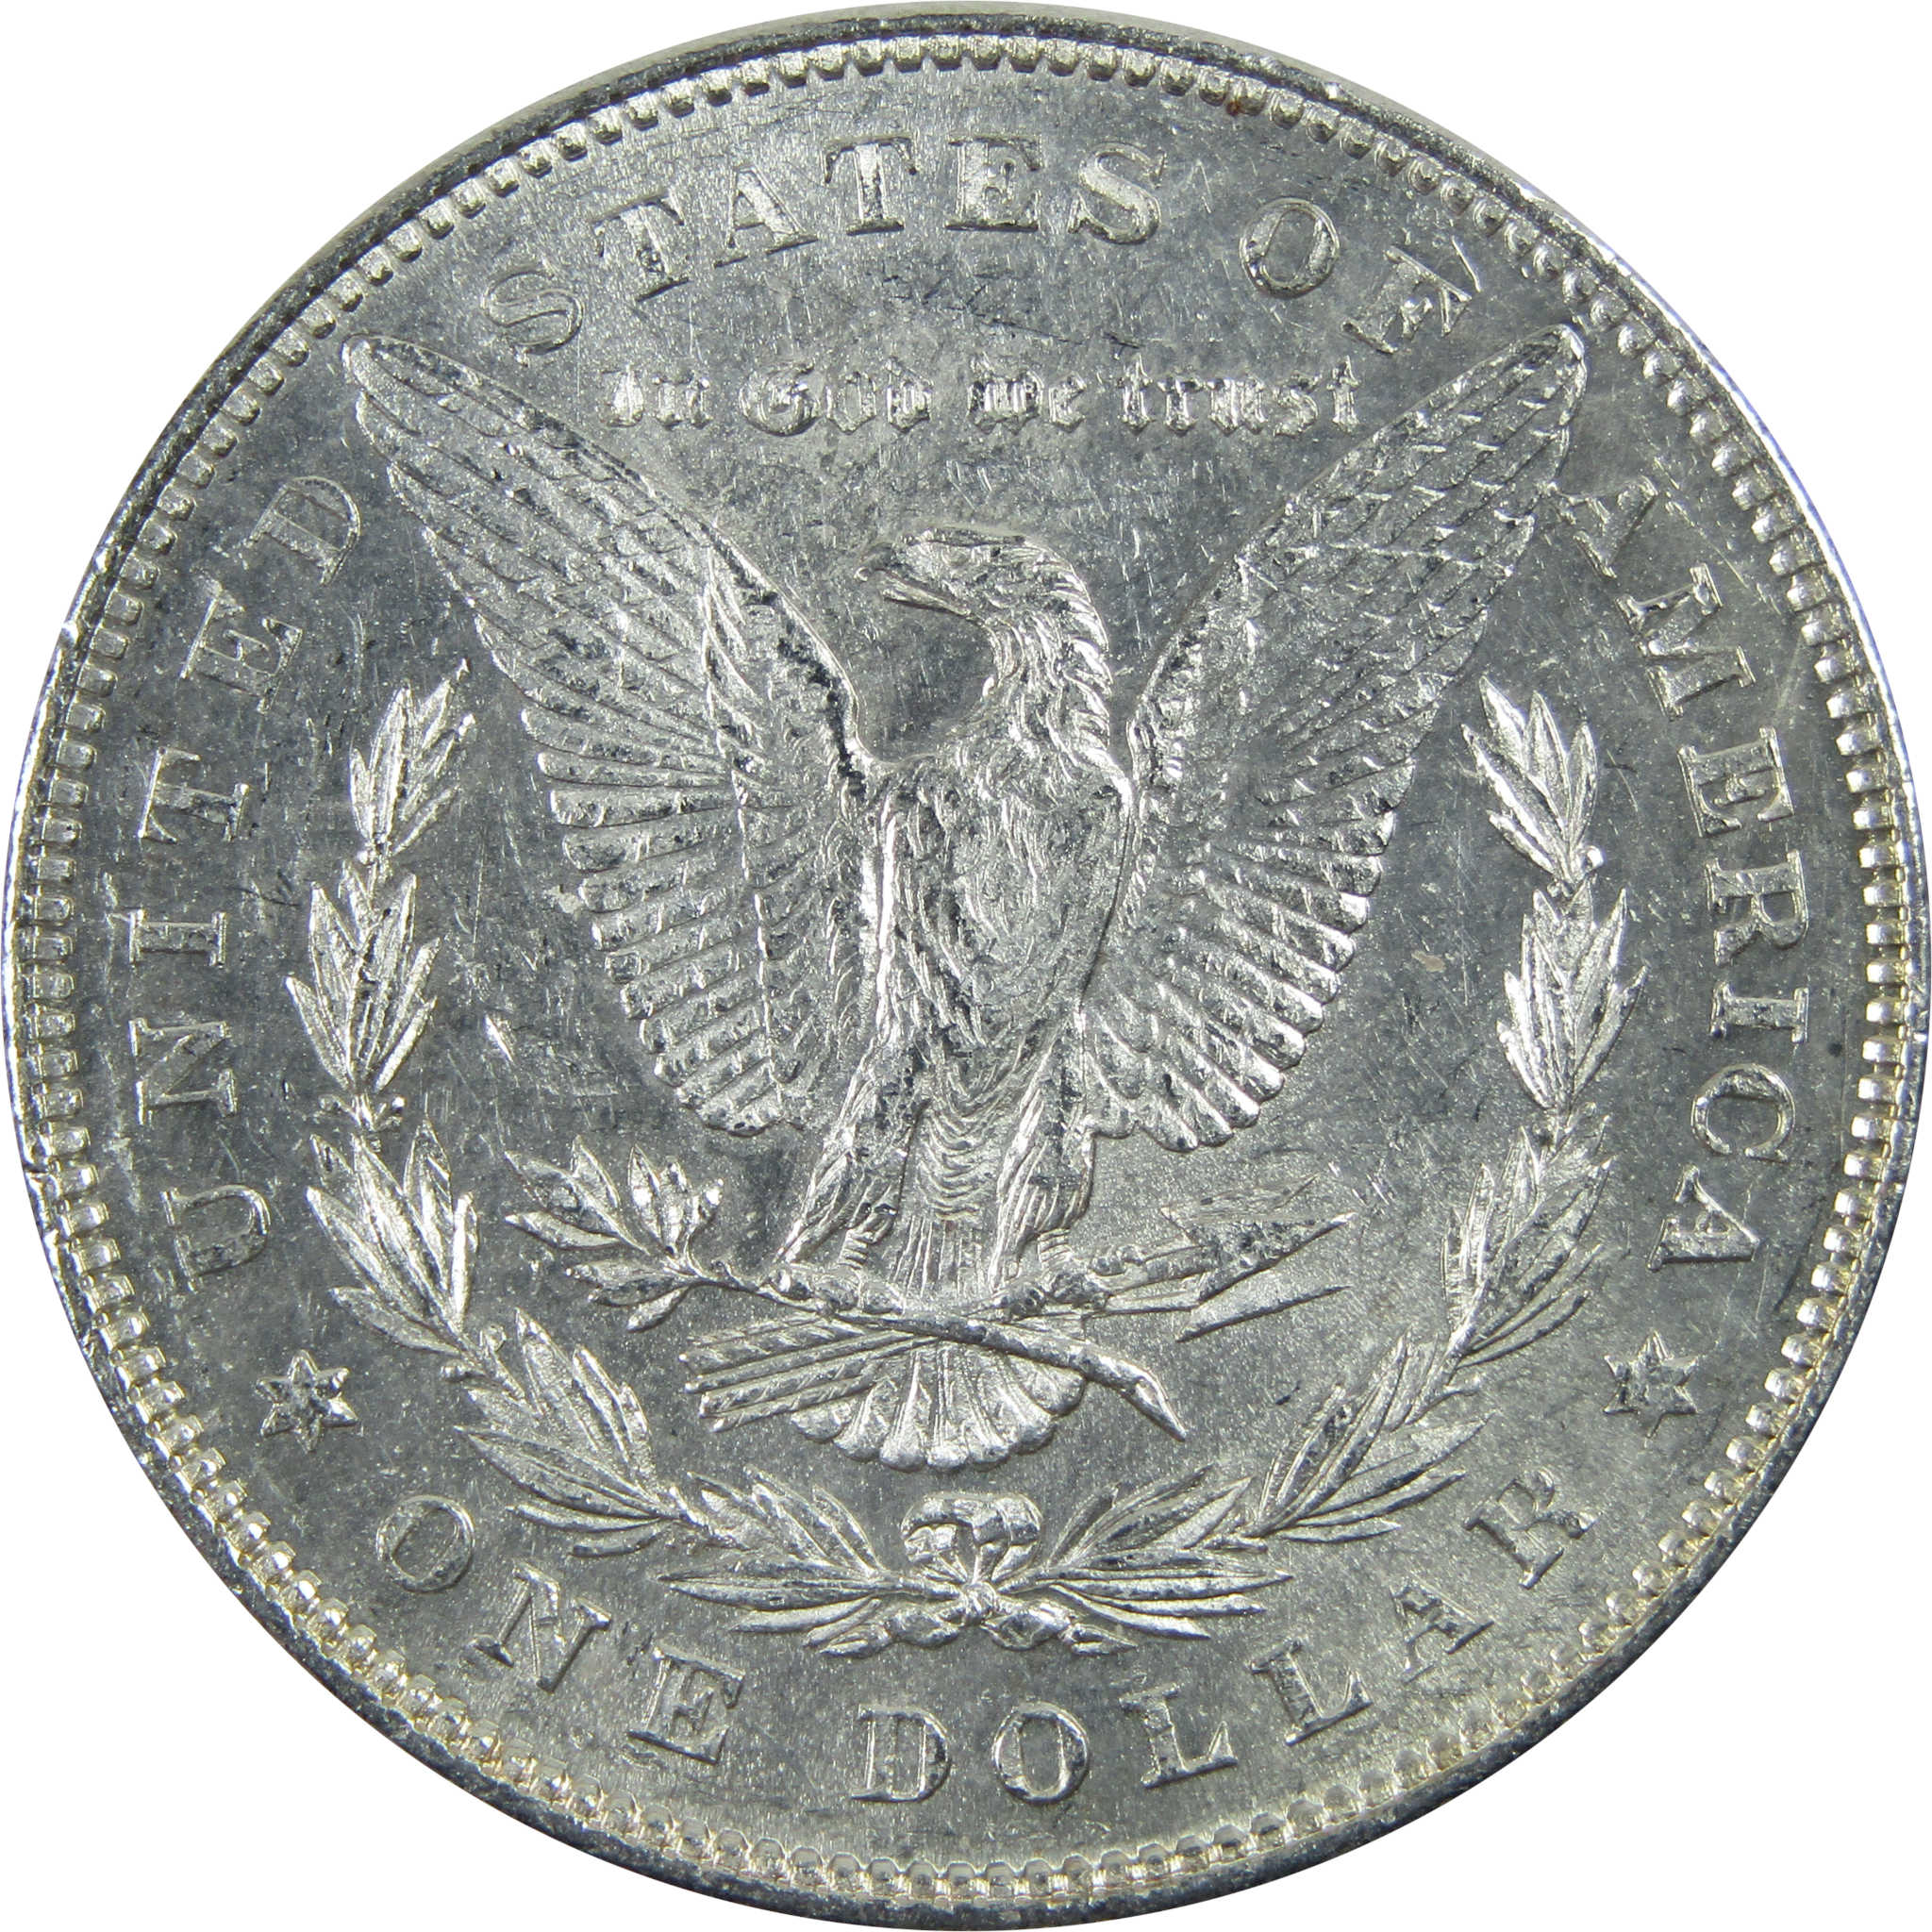 1878 7TF Rev 78 Morgan Dollar AU About Unc Silver $1 Coin SKU:I13459 - Morgan coin - Morgan silver dollar - Morgan silver dollar for sale - Profile Coins &amp; Collectibles